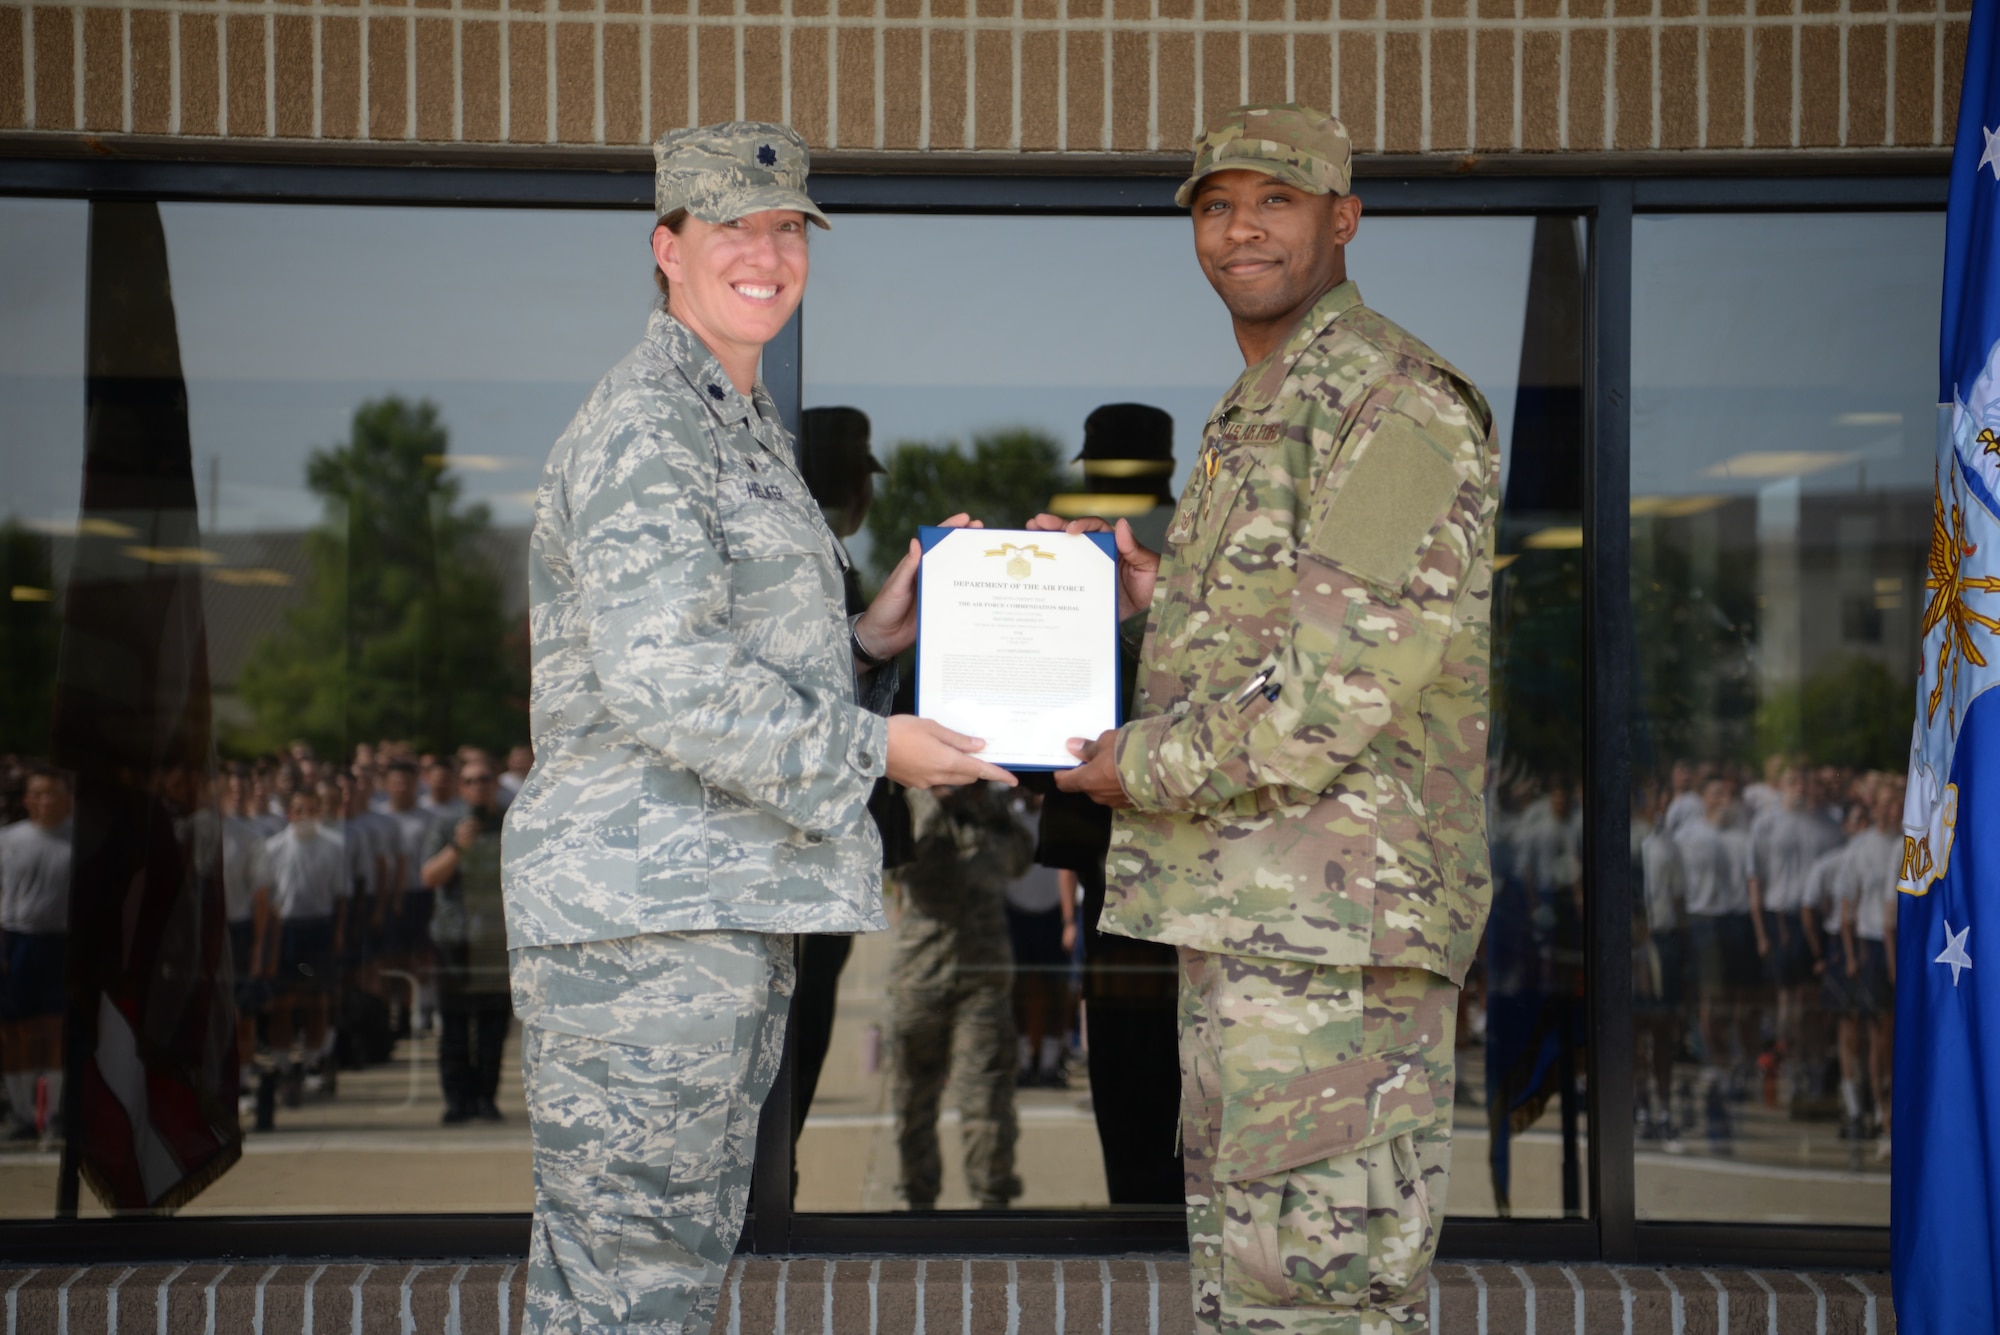 U.S. Air Force Lt. Col. Jill Heliker, 336th Training Squadron commader, and Tech. Sgt. Jonathan Collett, 336th Training Squadron cyber surety student, pose for a photo outside the Levitow Training Support Facillity on Keesler Air Force Base, Mississippi, June 27, 2019. Collett recieved an Air Force Commendation Medal for saving Dennis Boney, Harrison County Police Department deputy, after an accident that injured his leg. (U.S Air Force photo by Airman 1st Class Spencer Tobler)